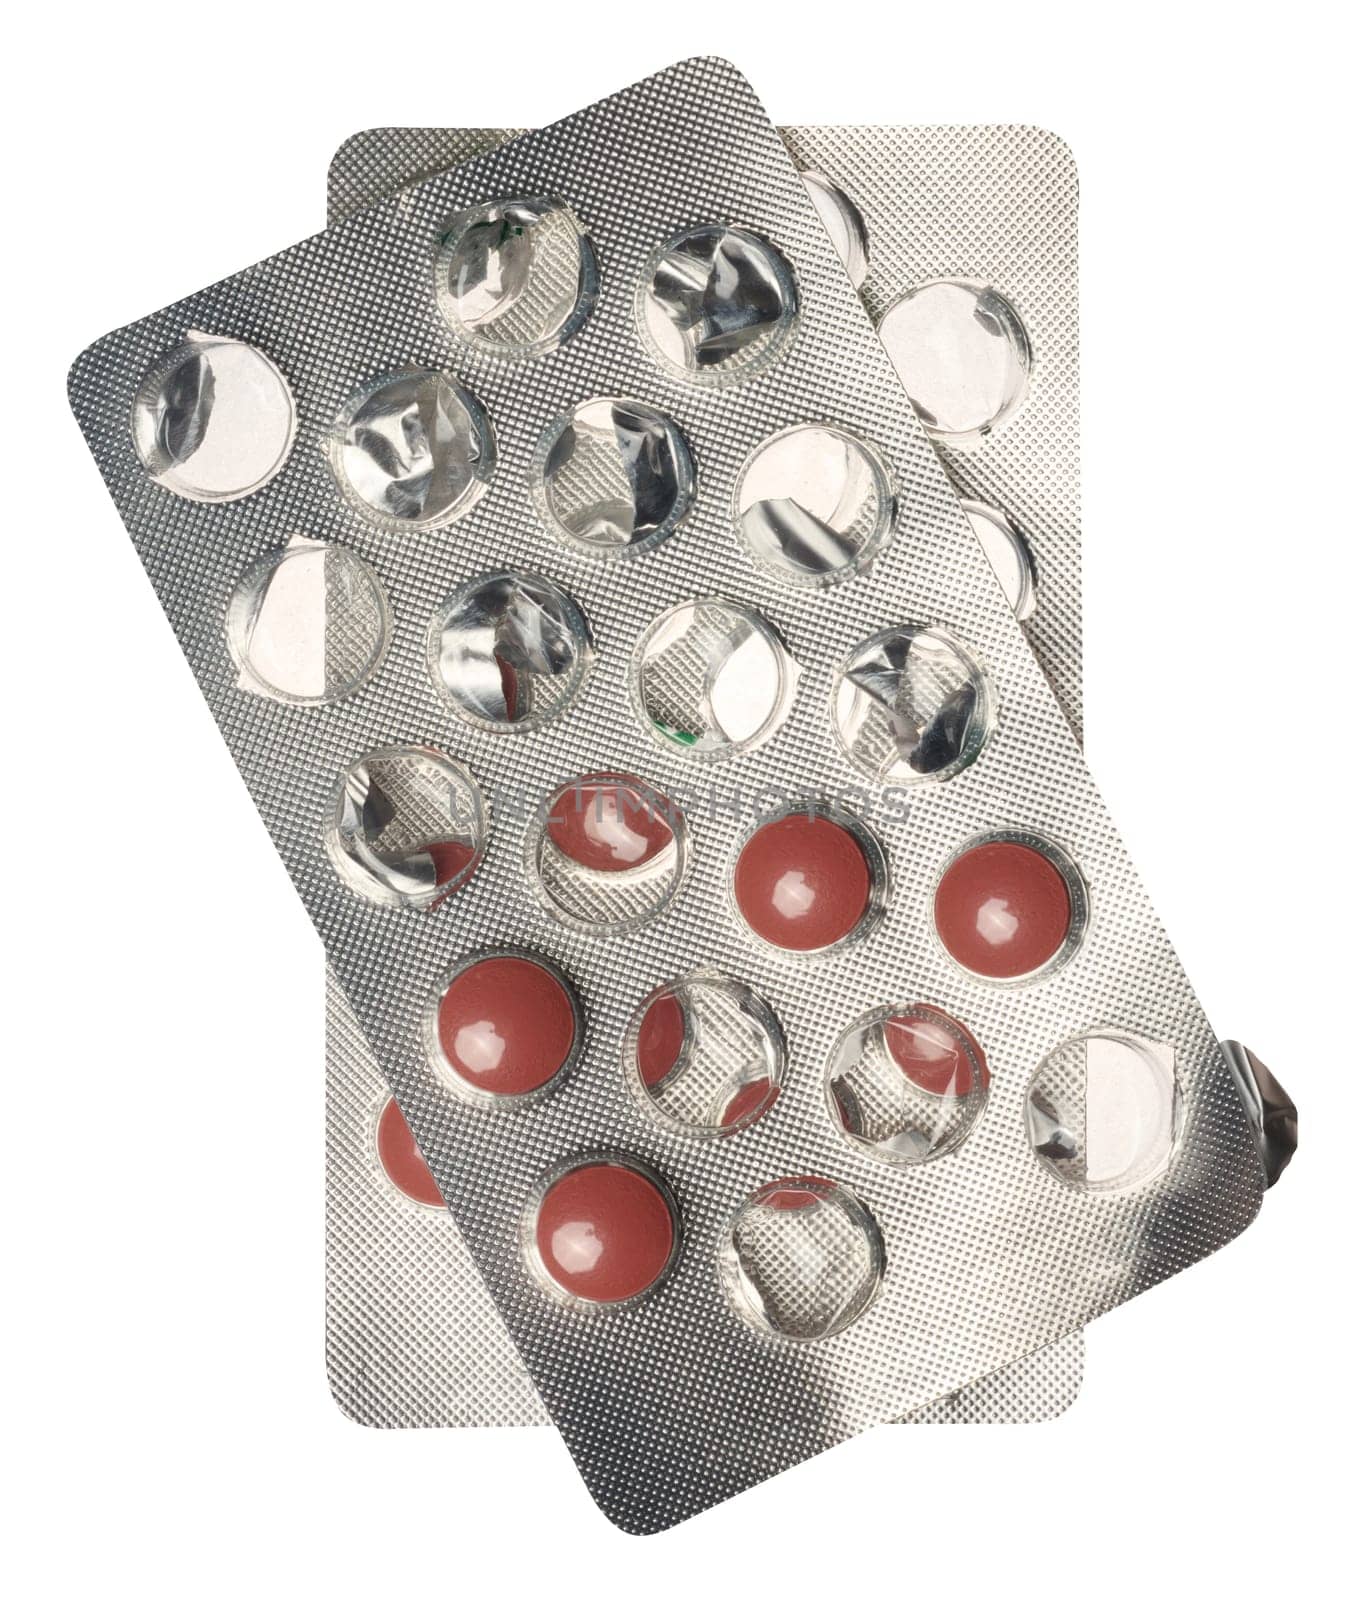 Round brown tablets in blister pack, top view